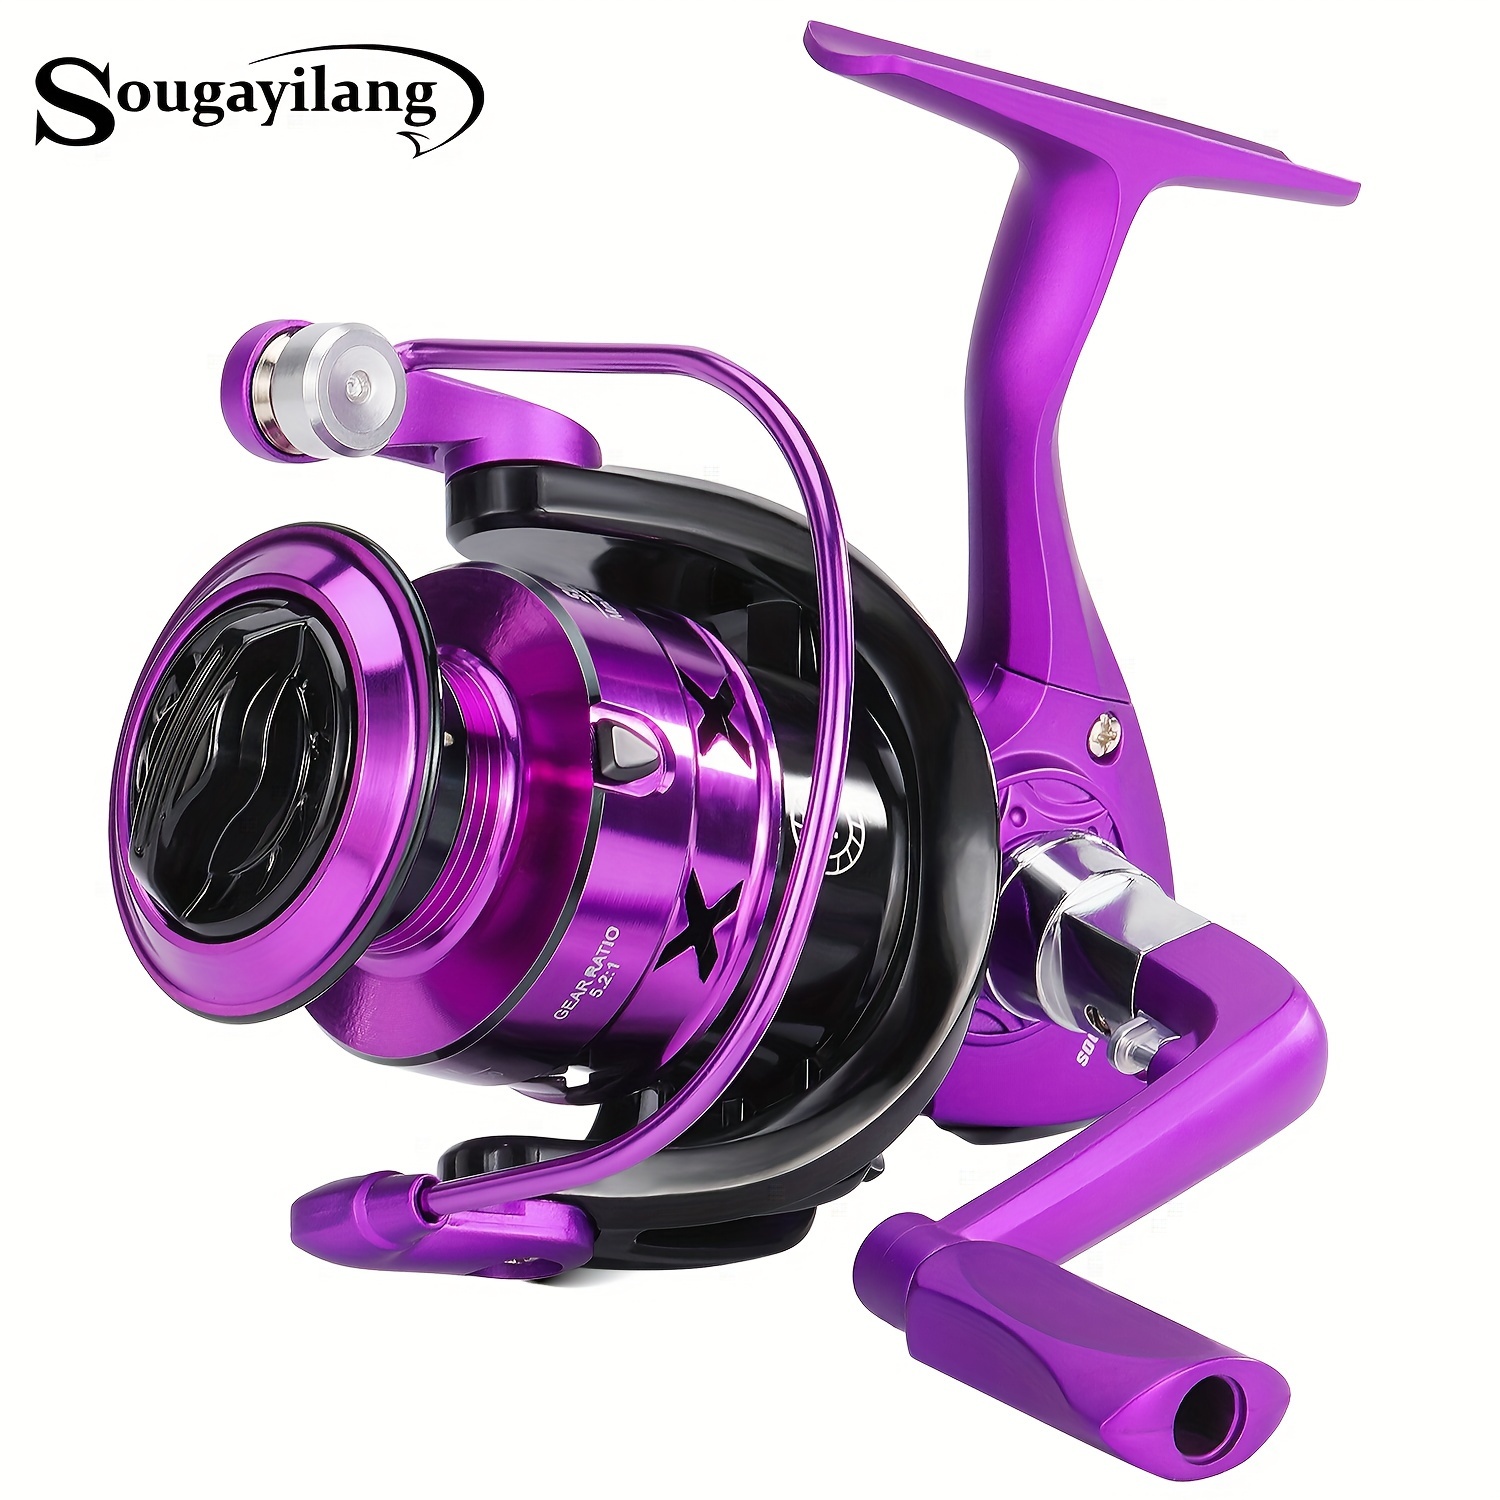 Sougayilang Stainless Steel Spinning Reel With Foldable EVA Handle, 5.2:1  Gear Ratio Fishing Reel With 20lb/9kg Max Drag, Fishing Tackle For Bass Catf